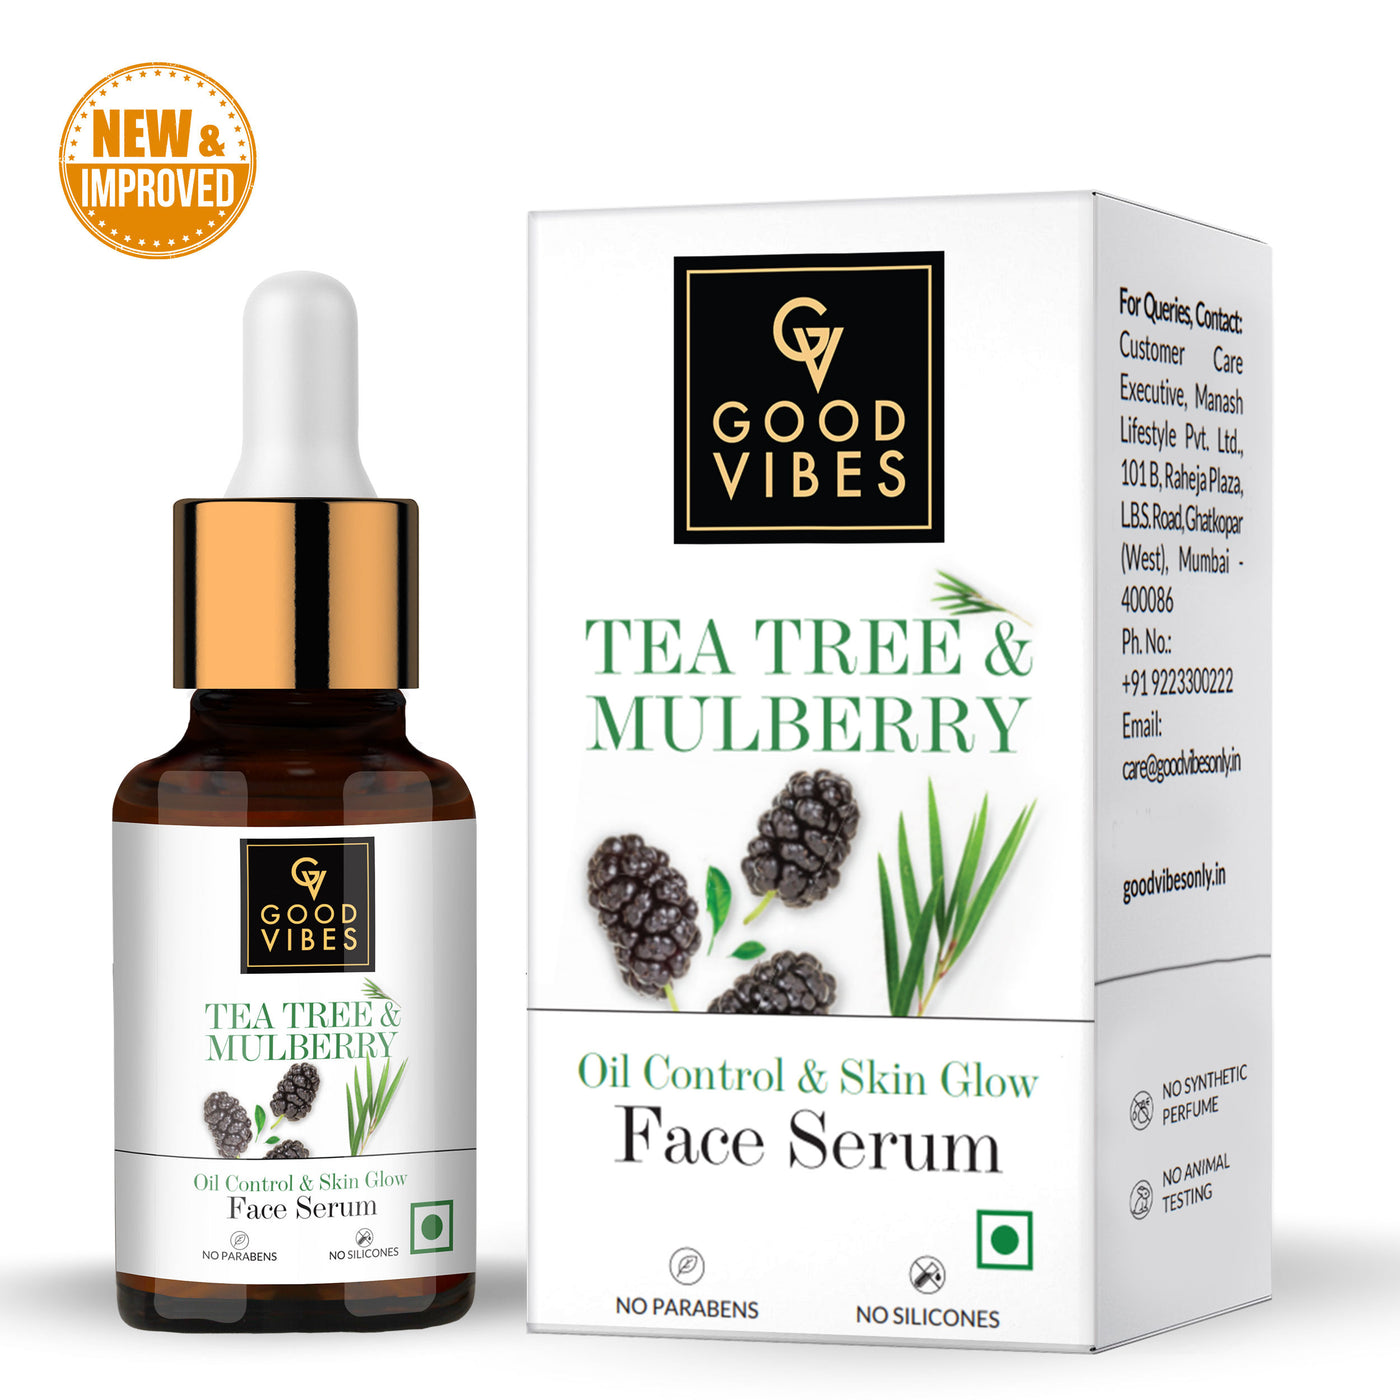 good-vibes-tea-tree-and-mulberry-blemish-control-face-serum-10ml-1